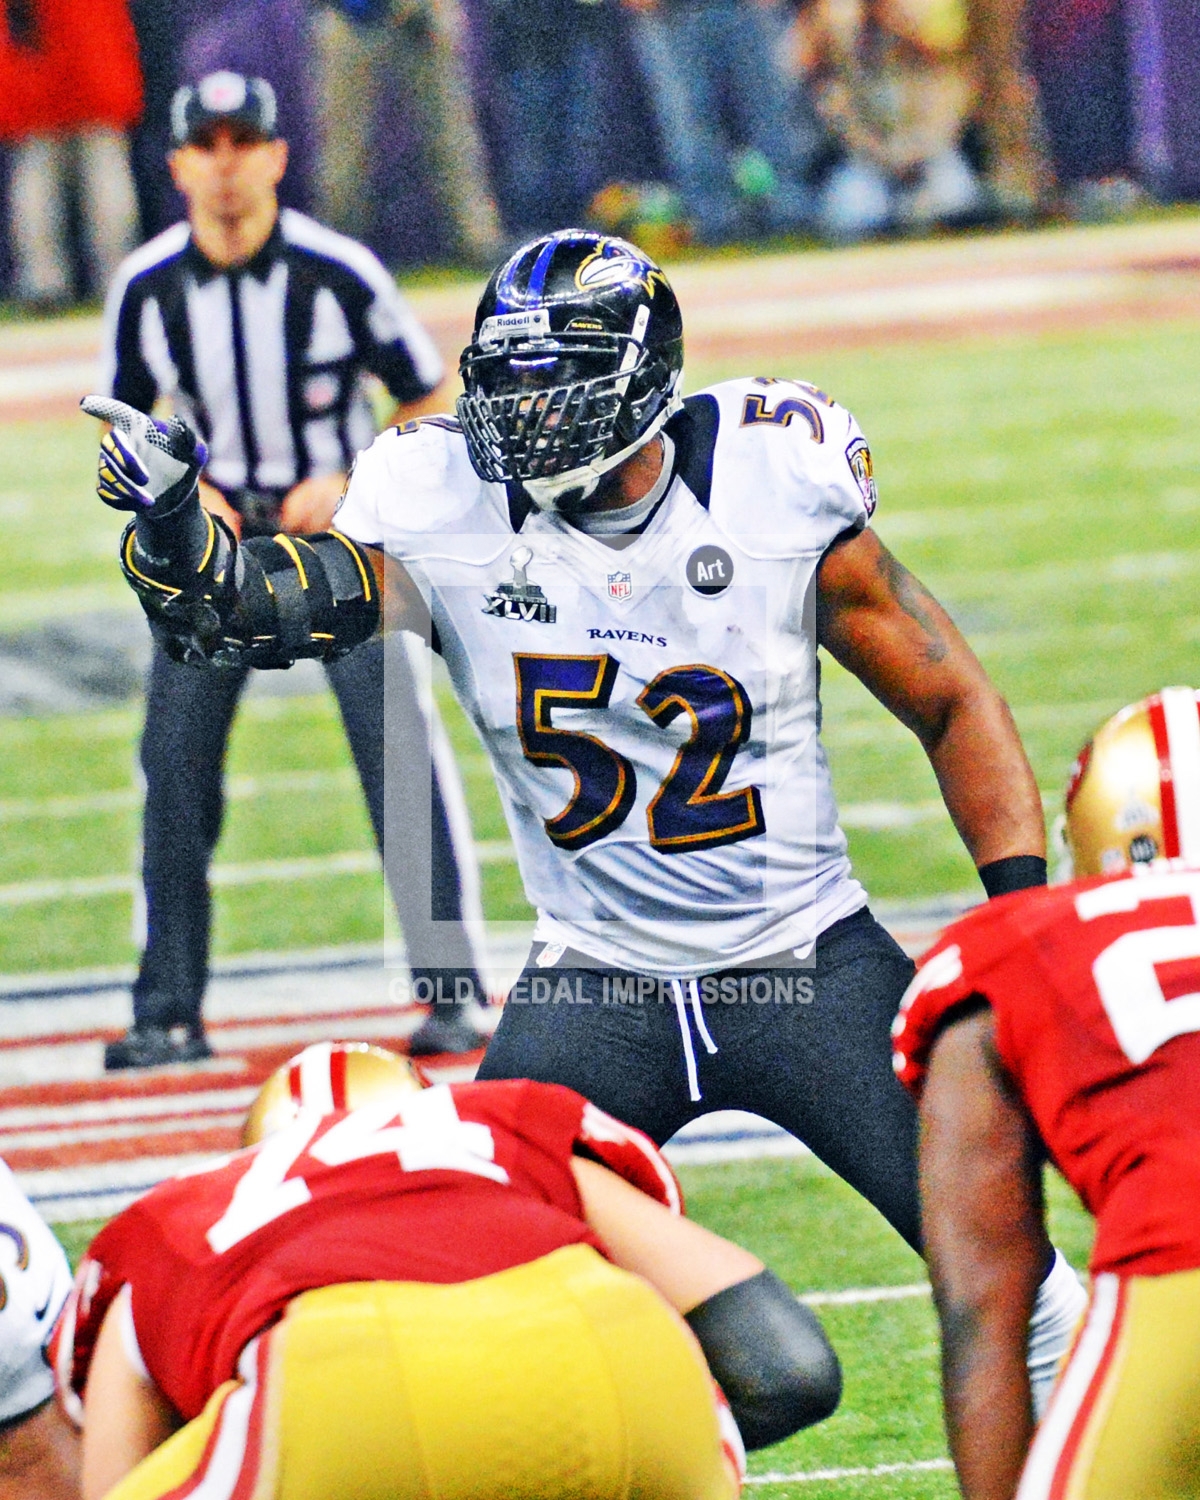 Baltimore Ravens leader, Ray Lewis, directs the Ravens defense in the fourth quarter against the San Francisoc 49ers in Super Bowl XLVII. The Baltimore Ravens